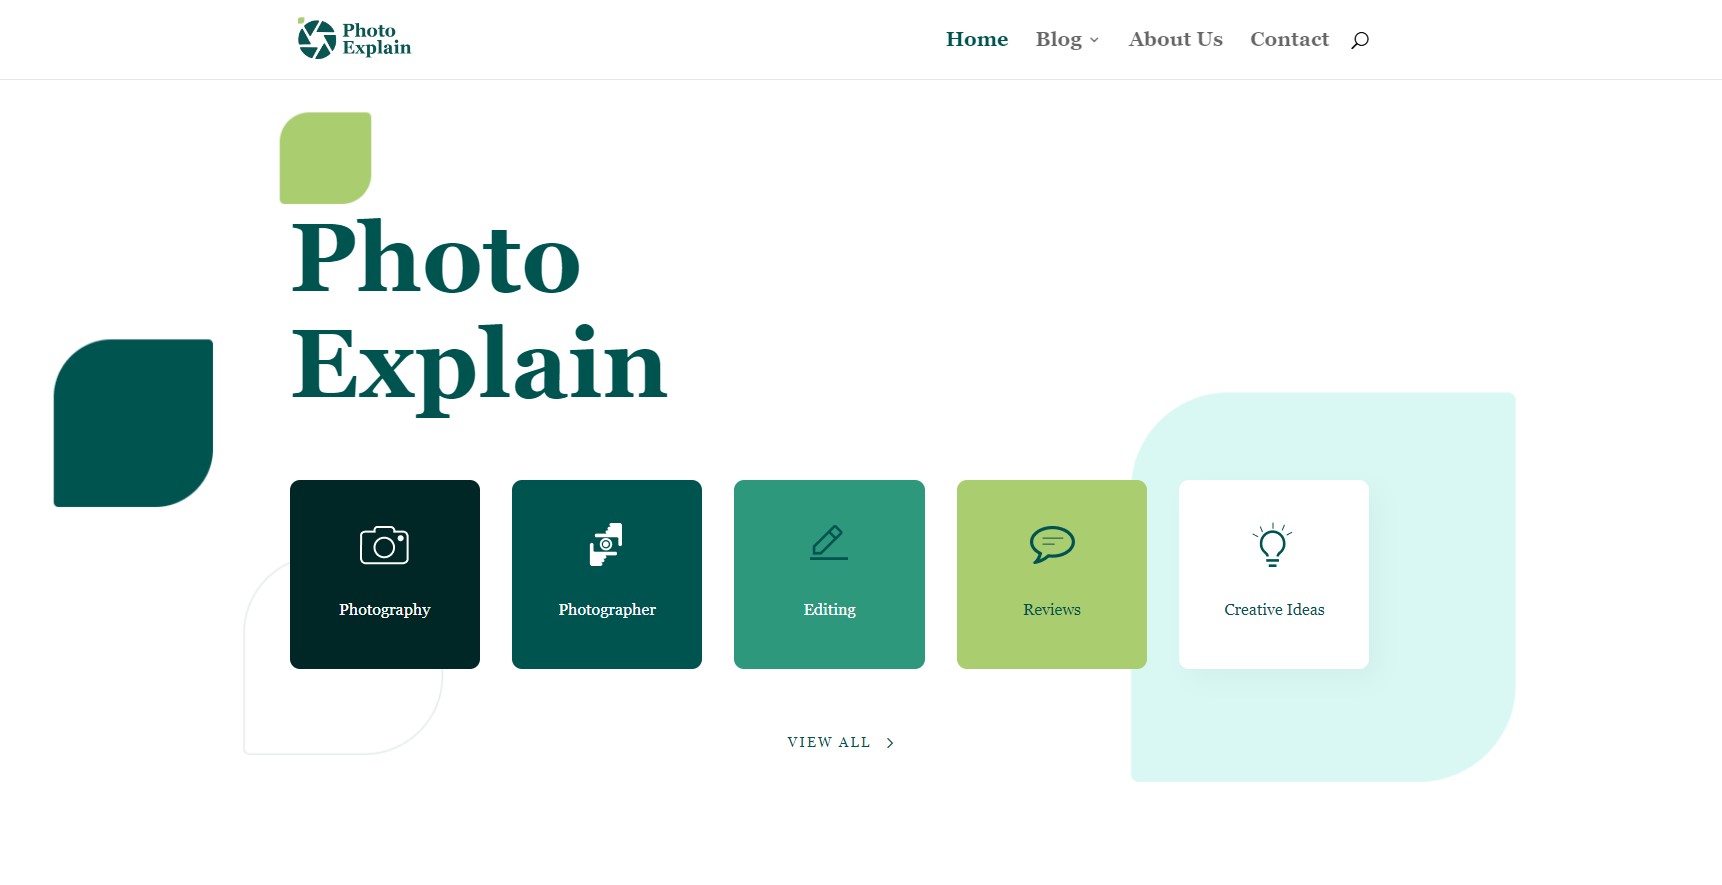 SEO Case Study for a photography website